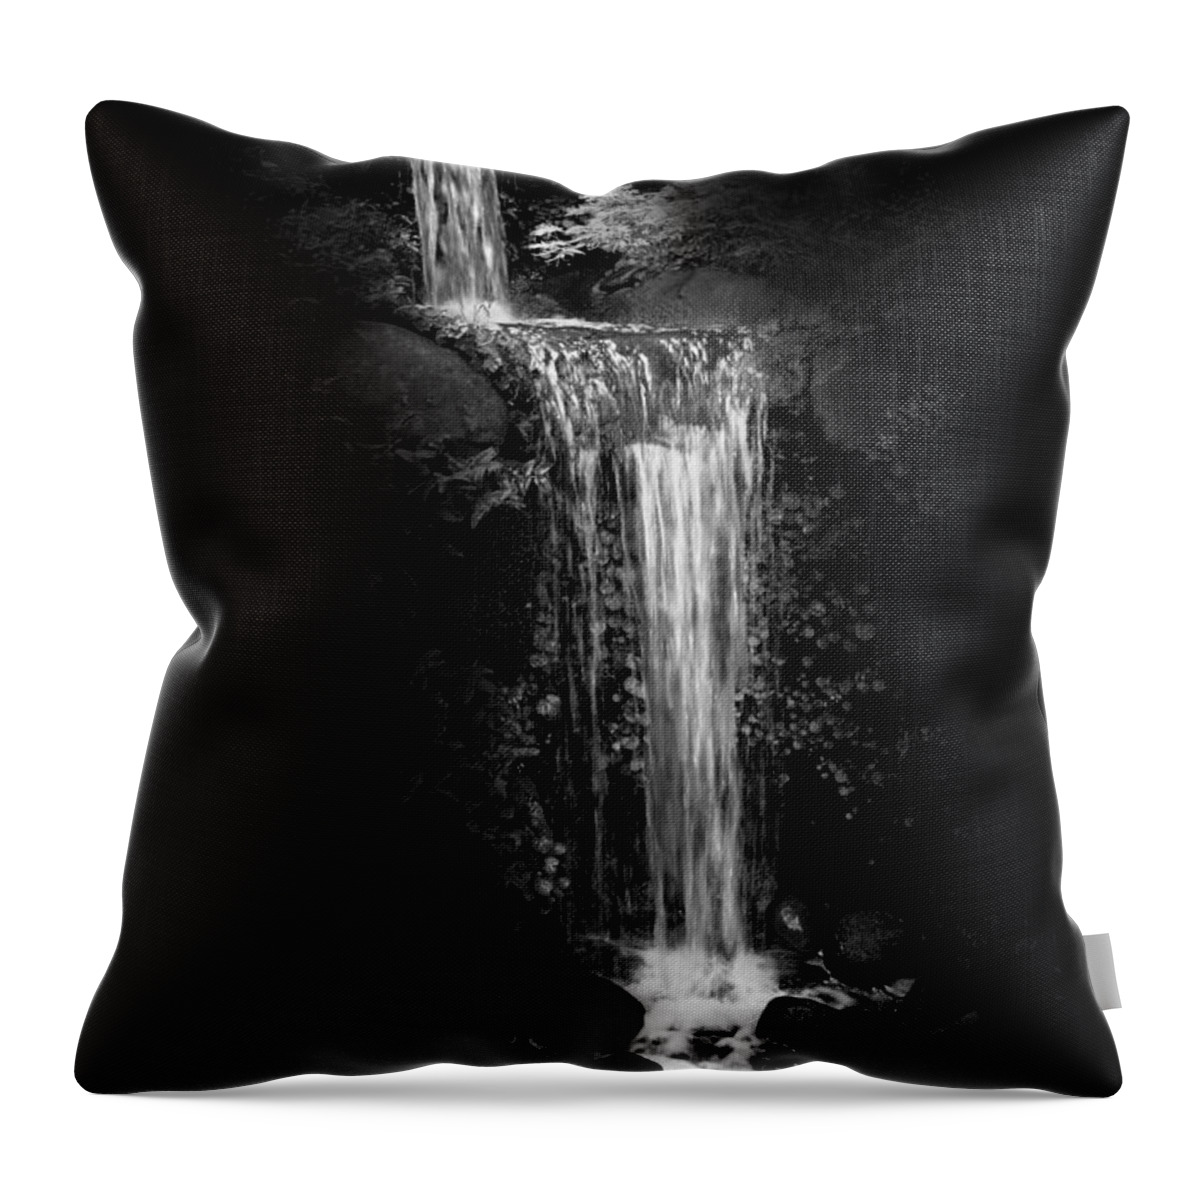 Waterfall Throw Pillow featuring the photograph Black magic waterfall by Peter Thoeny